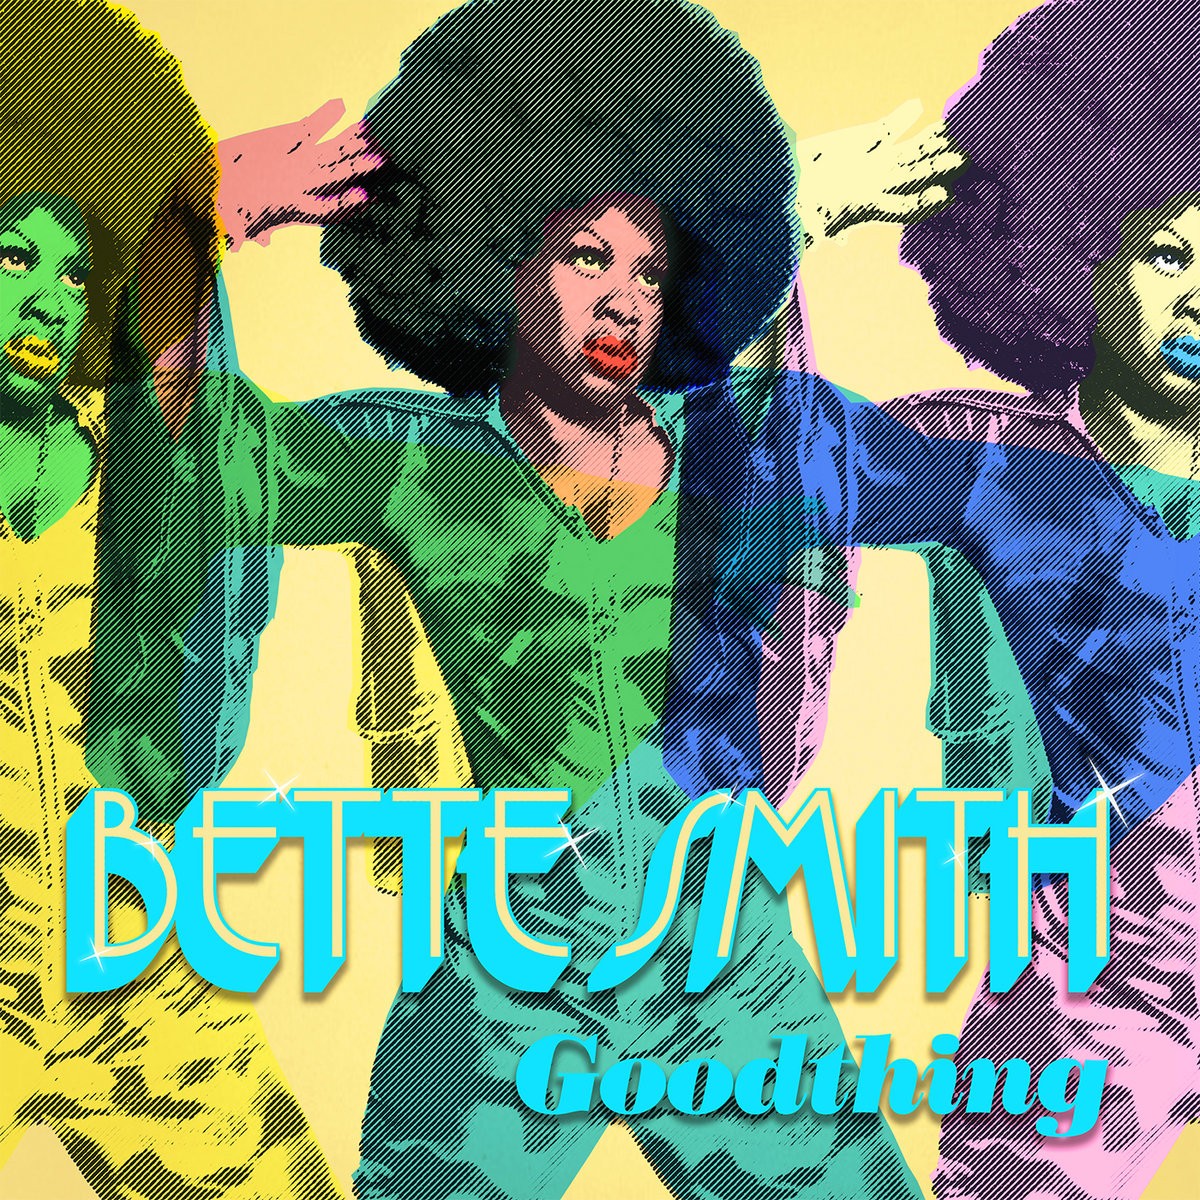 Bette Smith - Goodthing